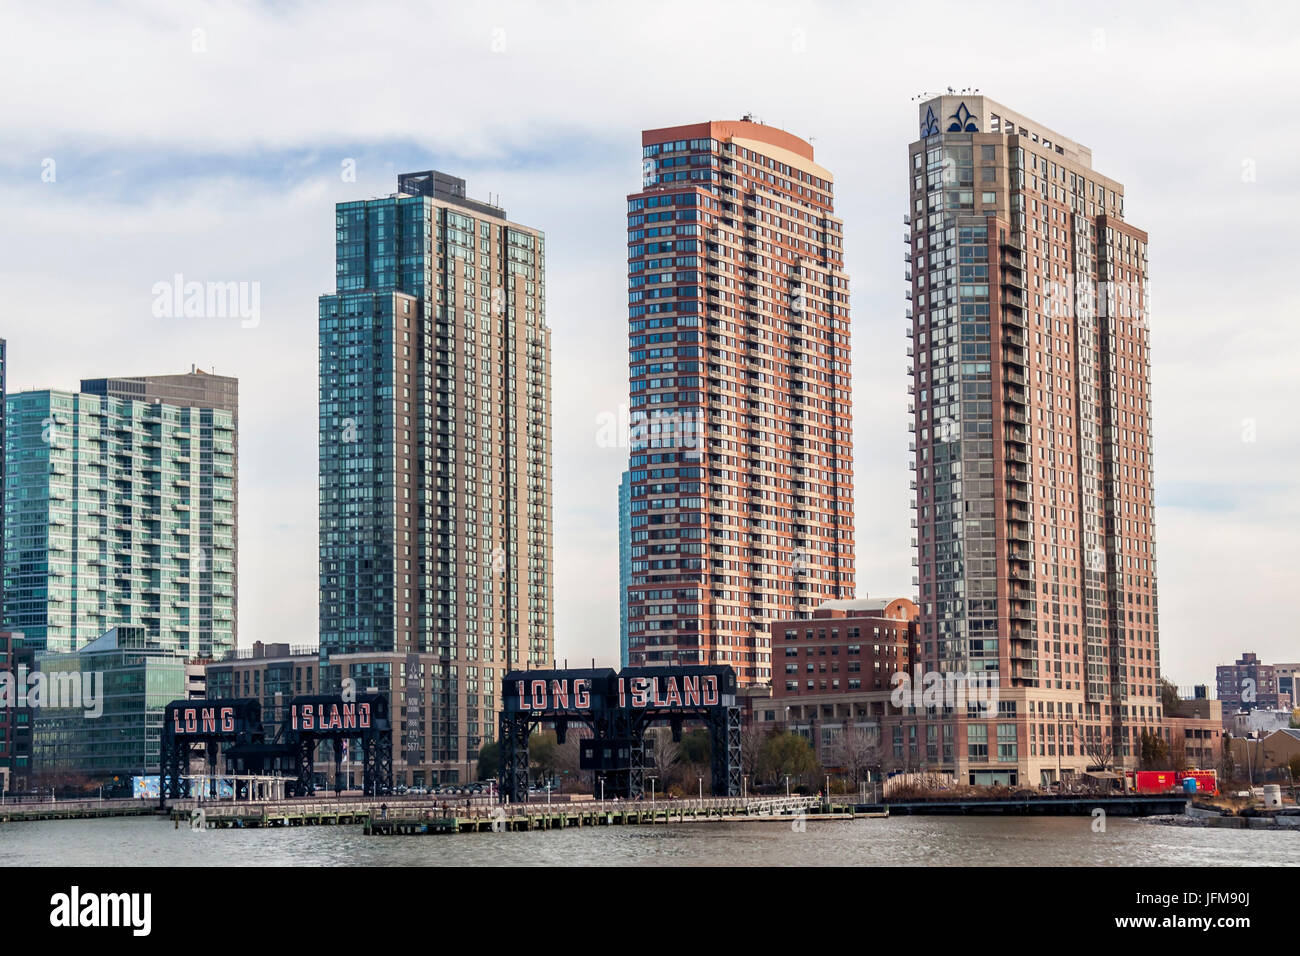 USA, New York, Long Island, Long Island City, Queens sur East River Banque D'Images